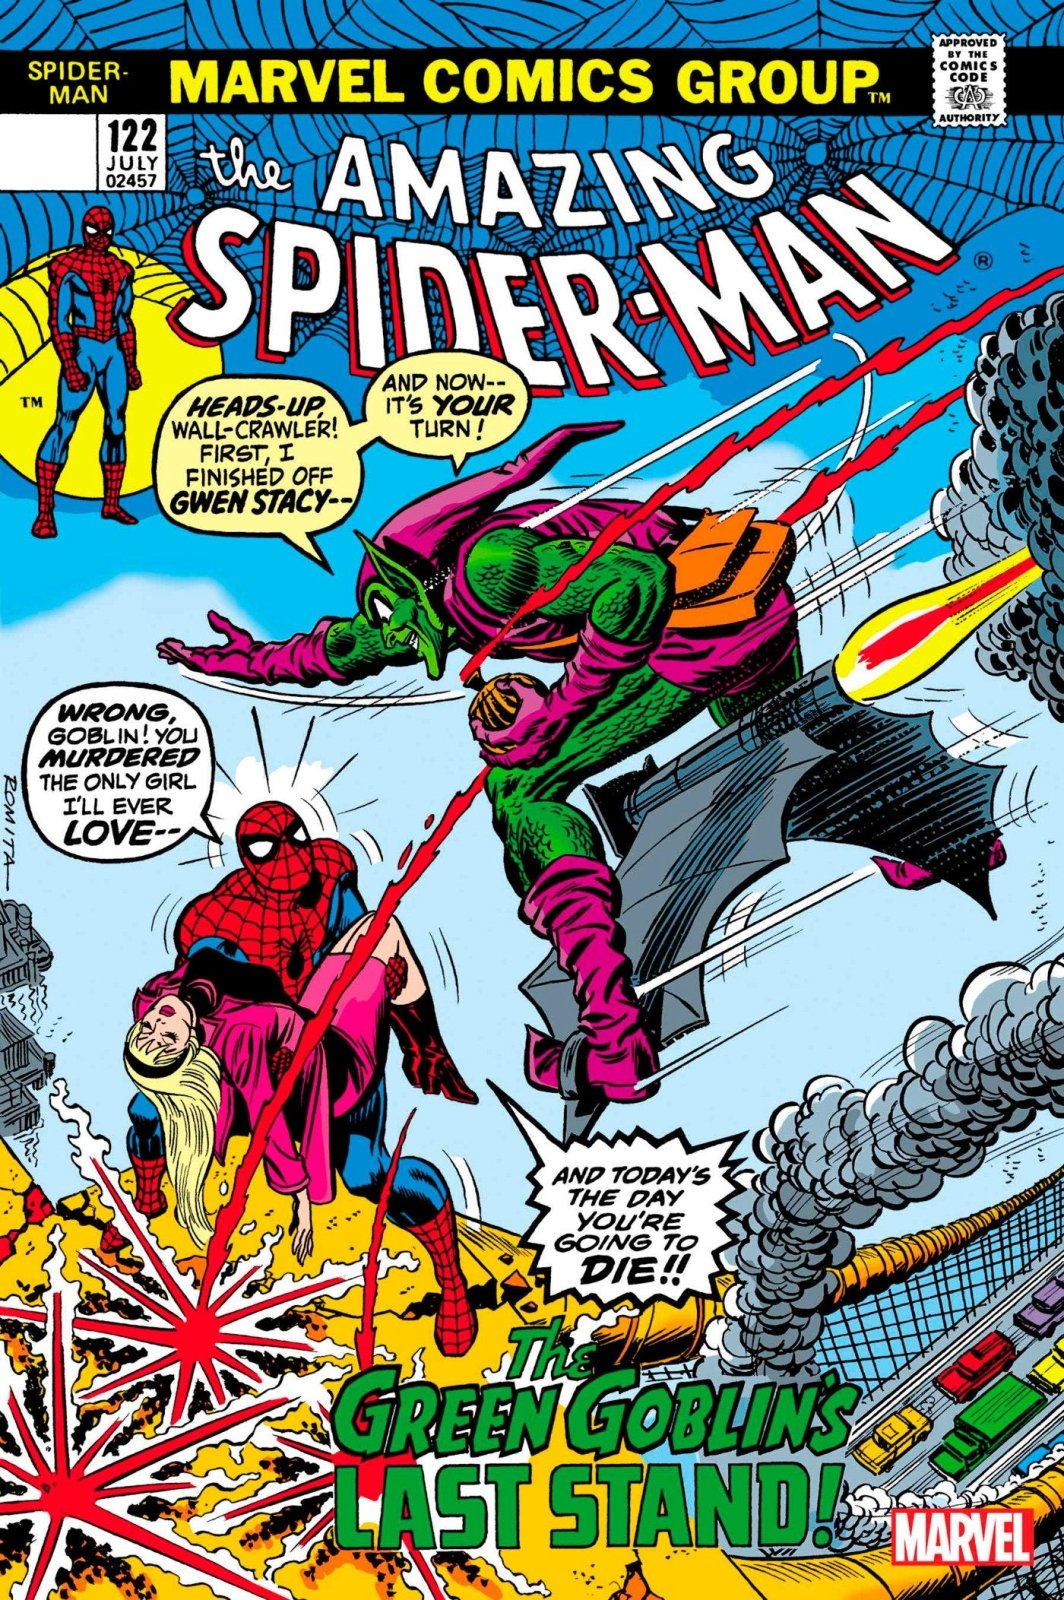 Amazing Spider-Man 122 Facsimile Edition - The Fourth Place